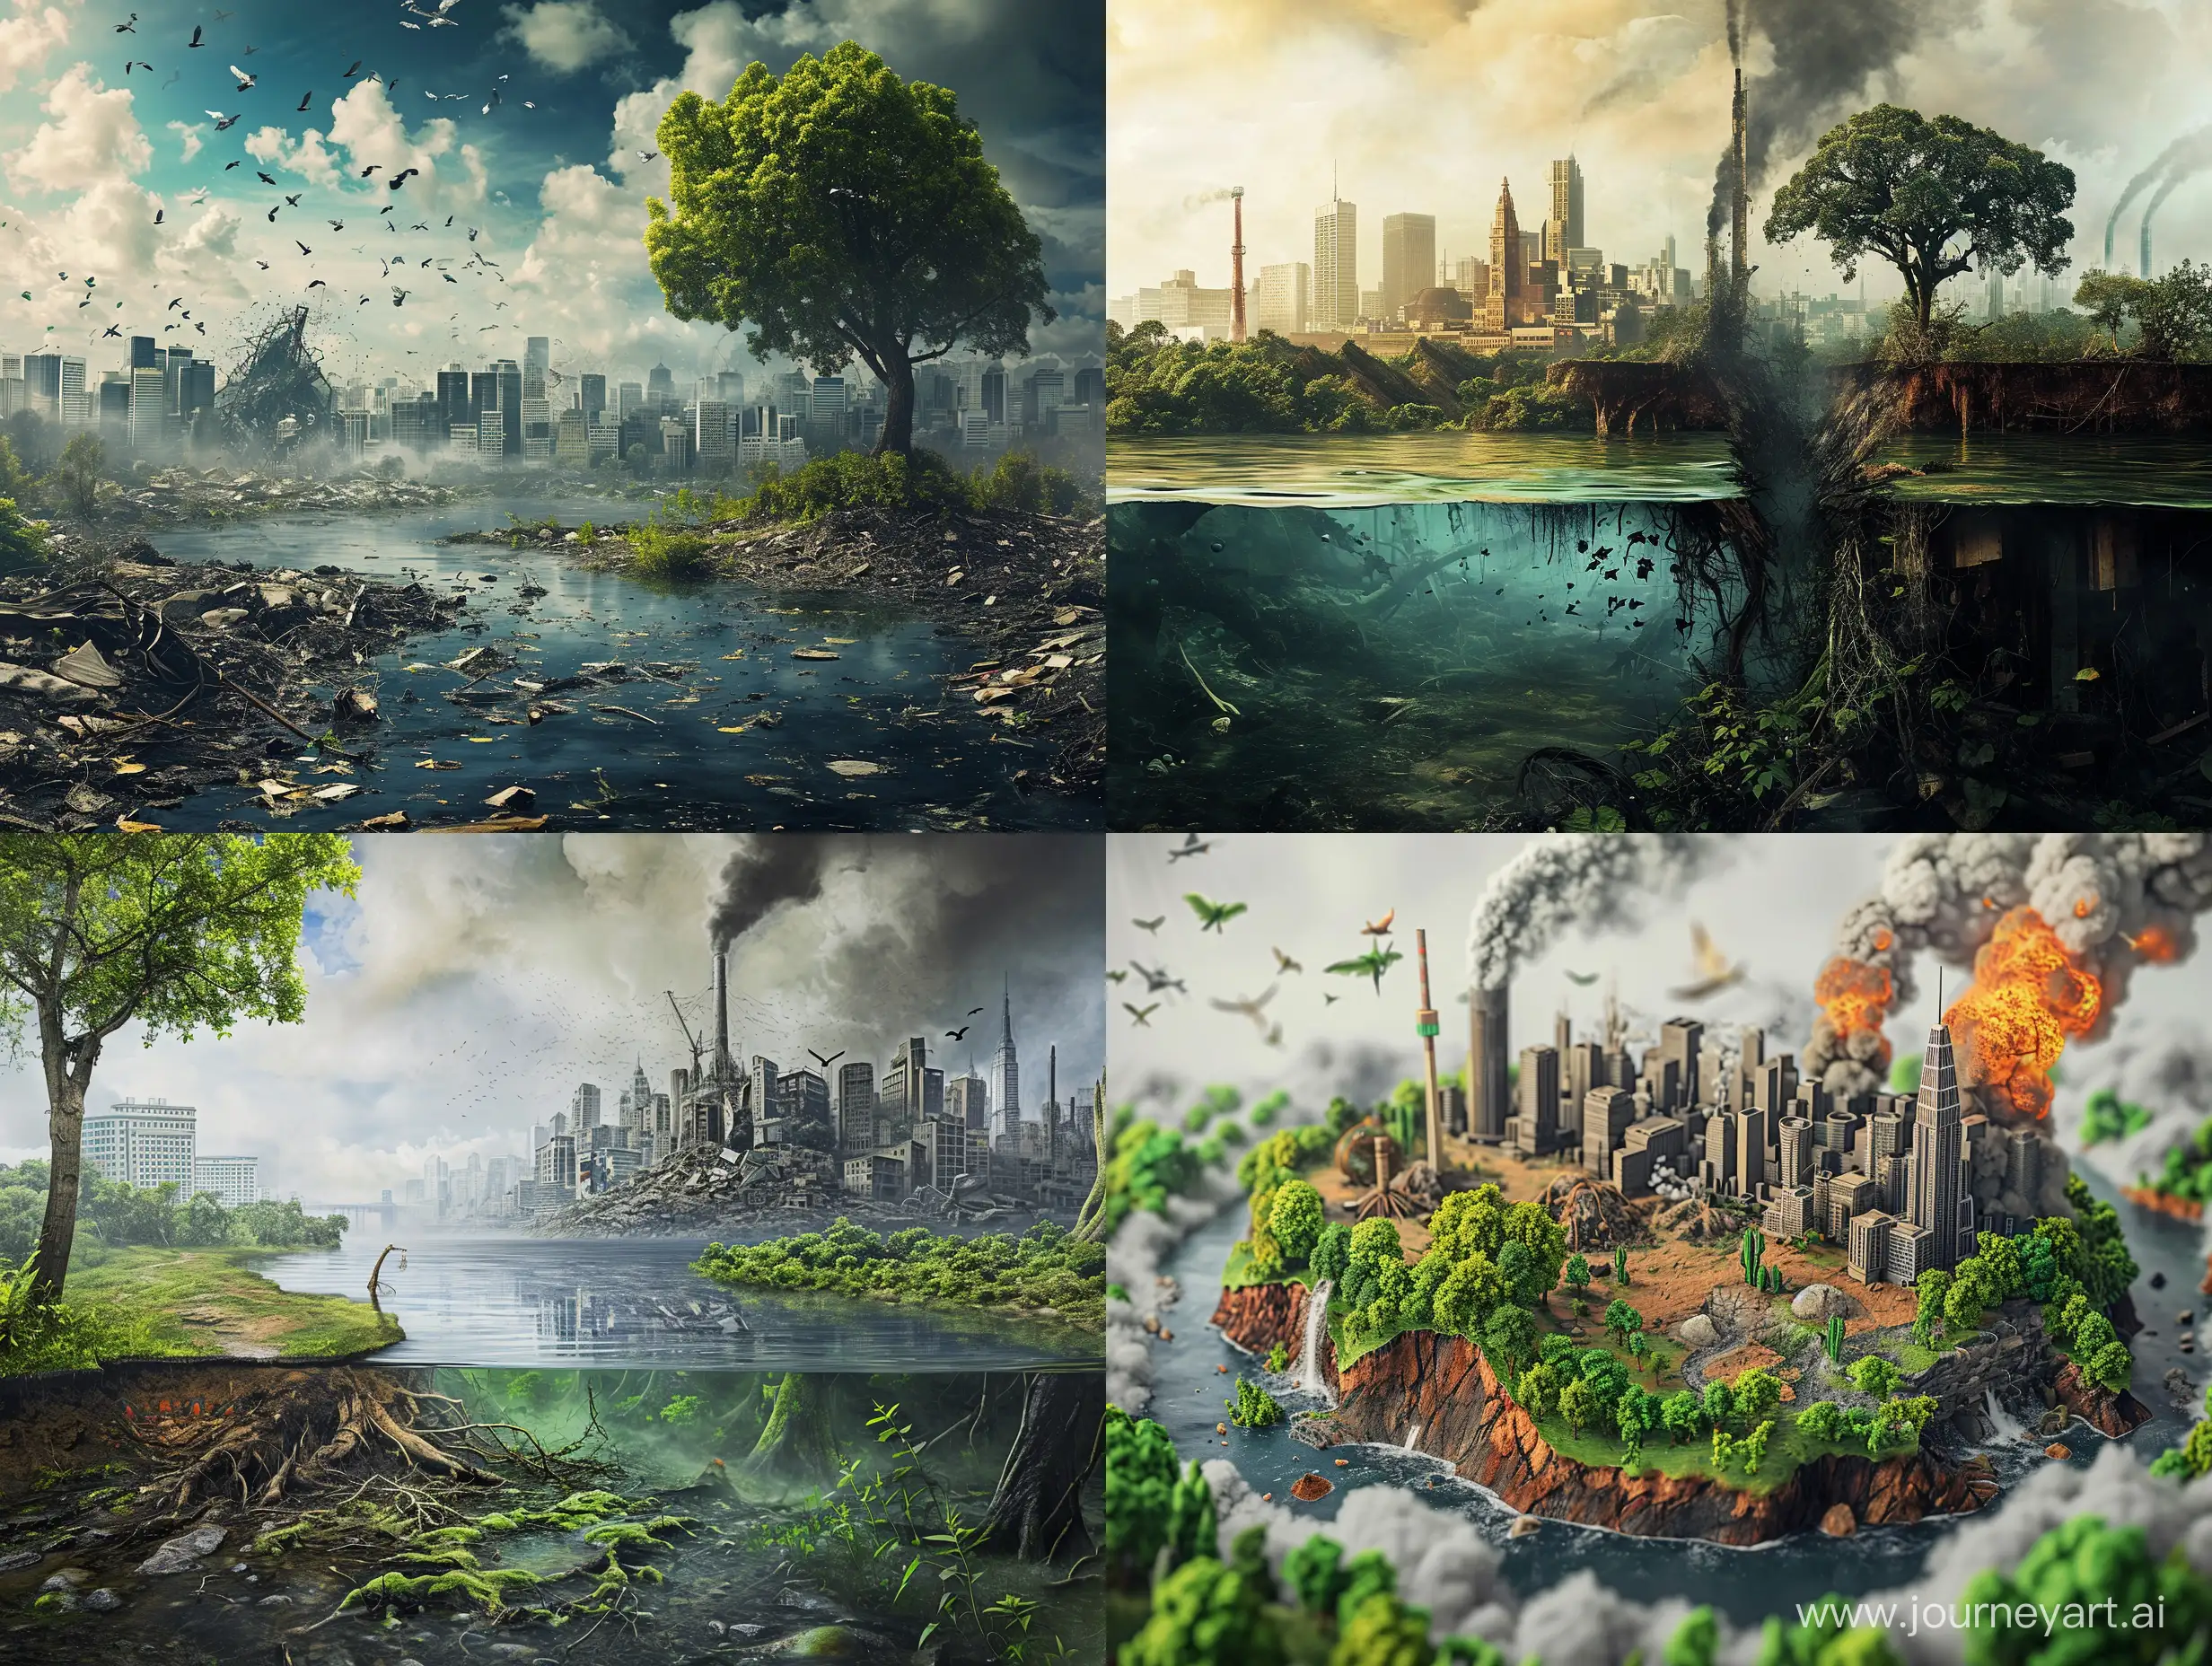 Consequences-of-Environmental-Destruction-Pollution-Deforestation-and-Injustice